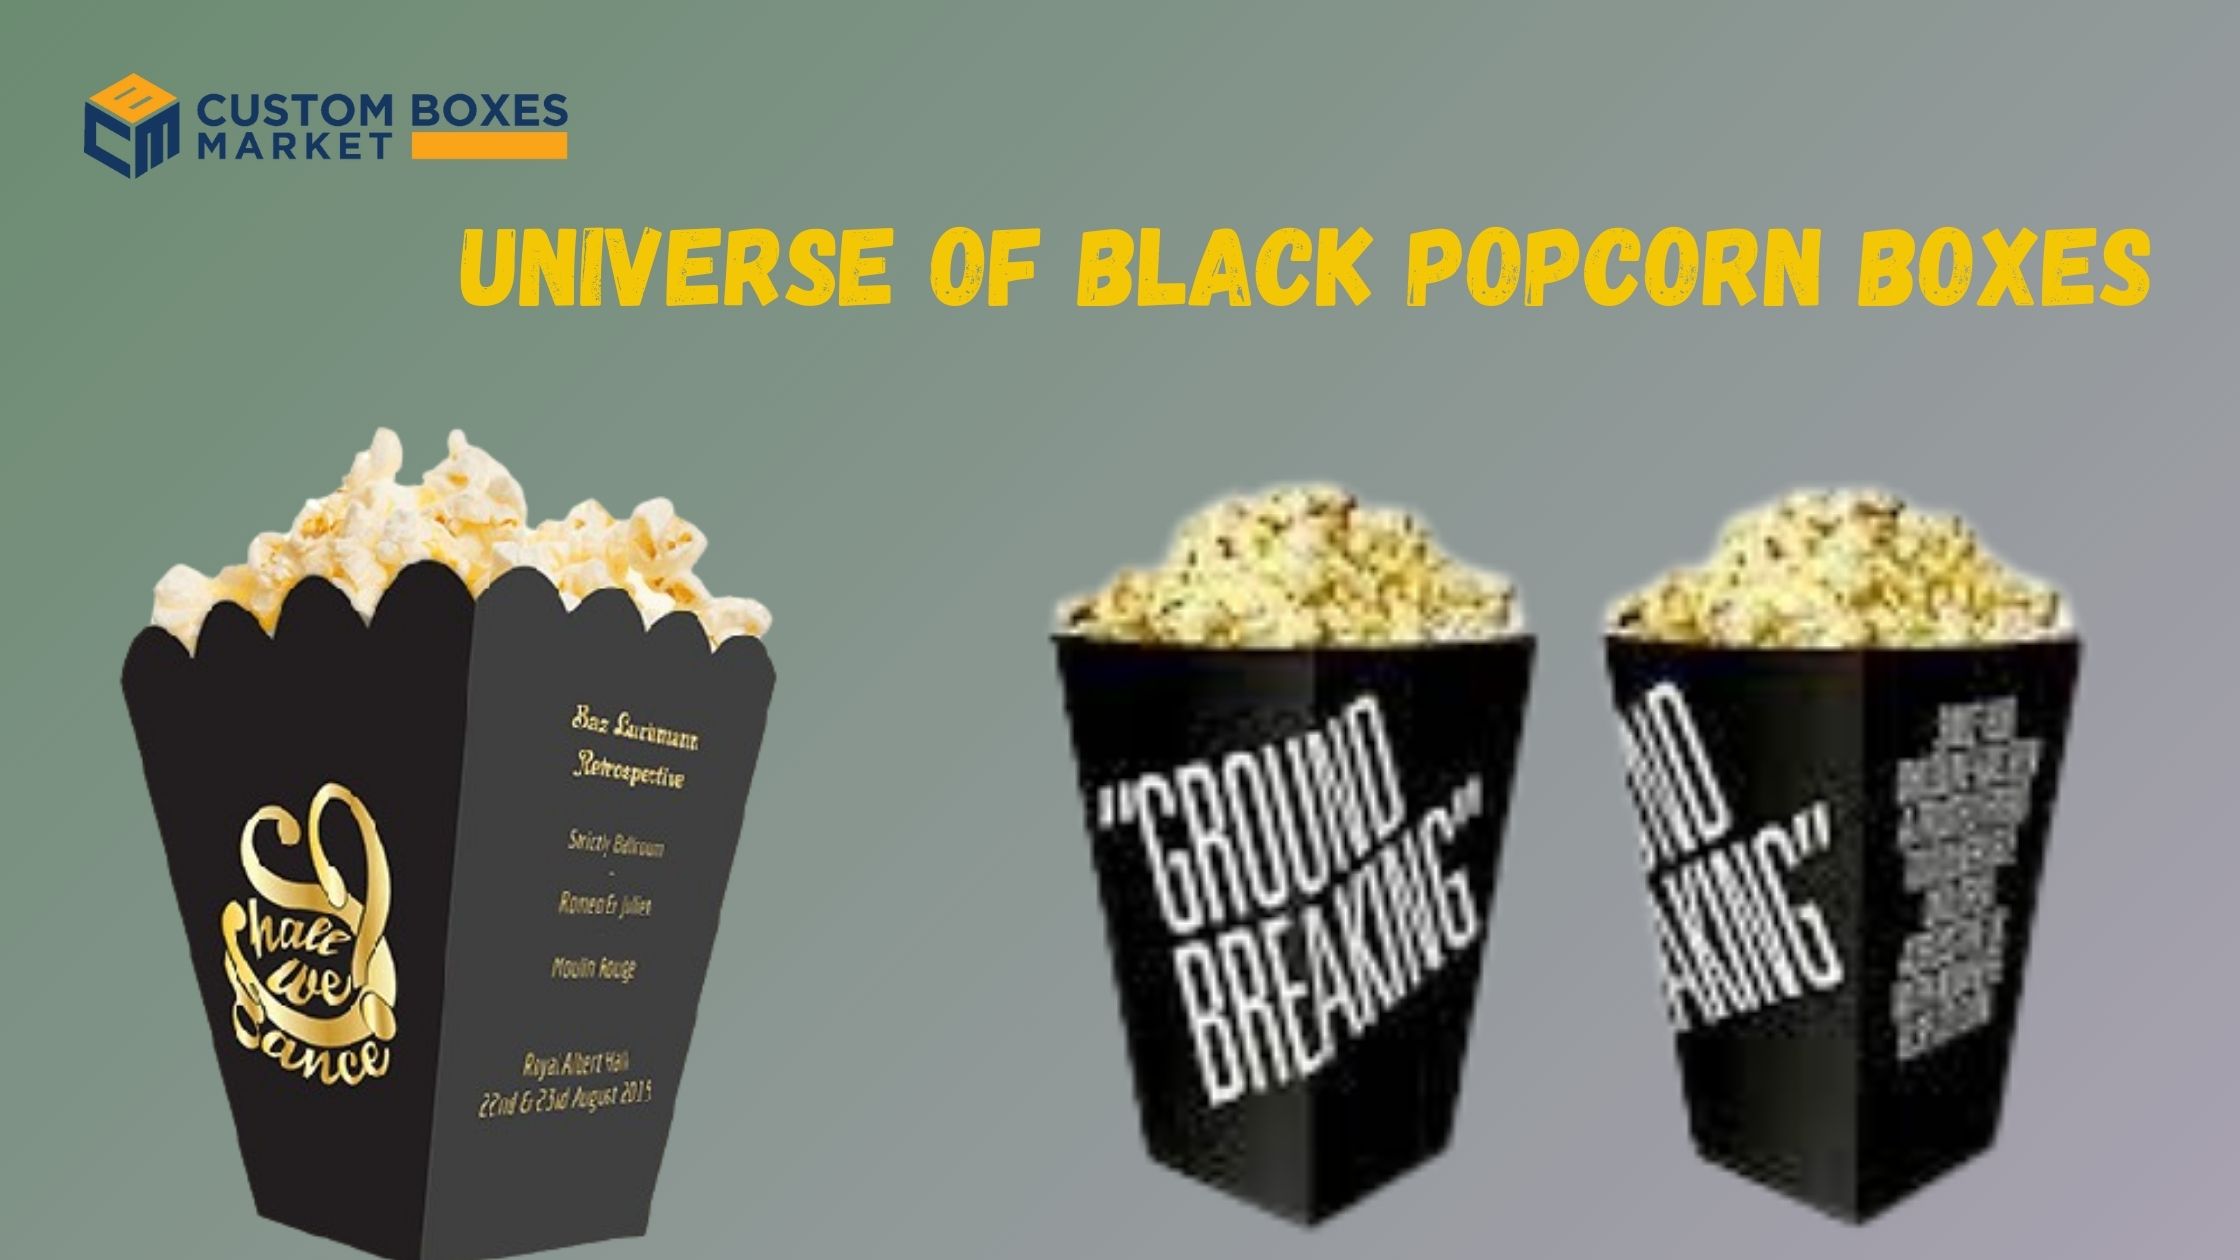 Cardboard Popcorn Boxes For Authentic Cinema Experience